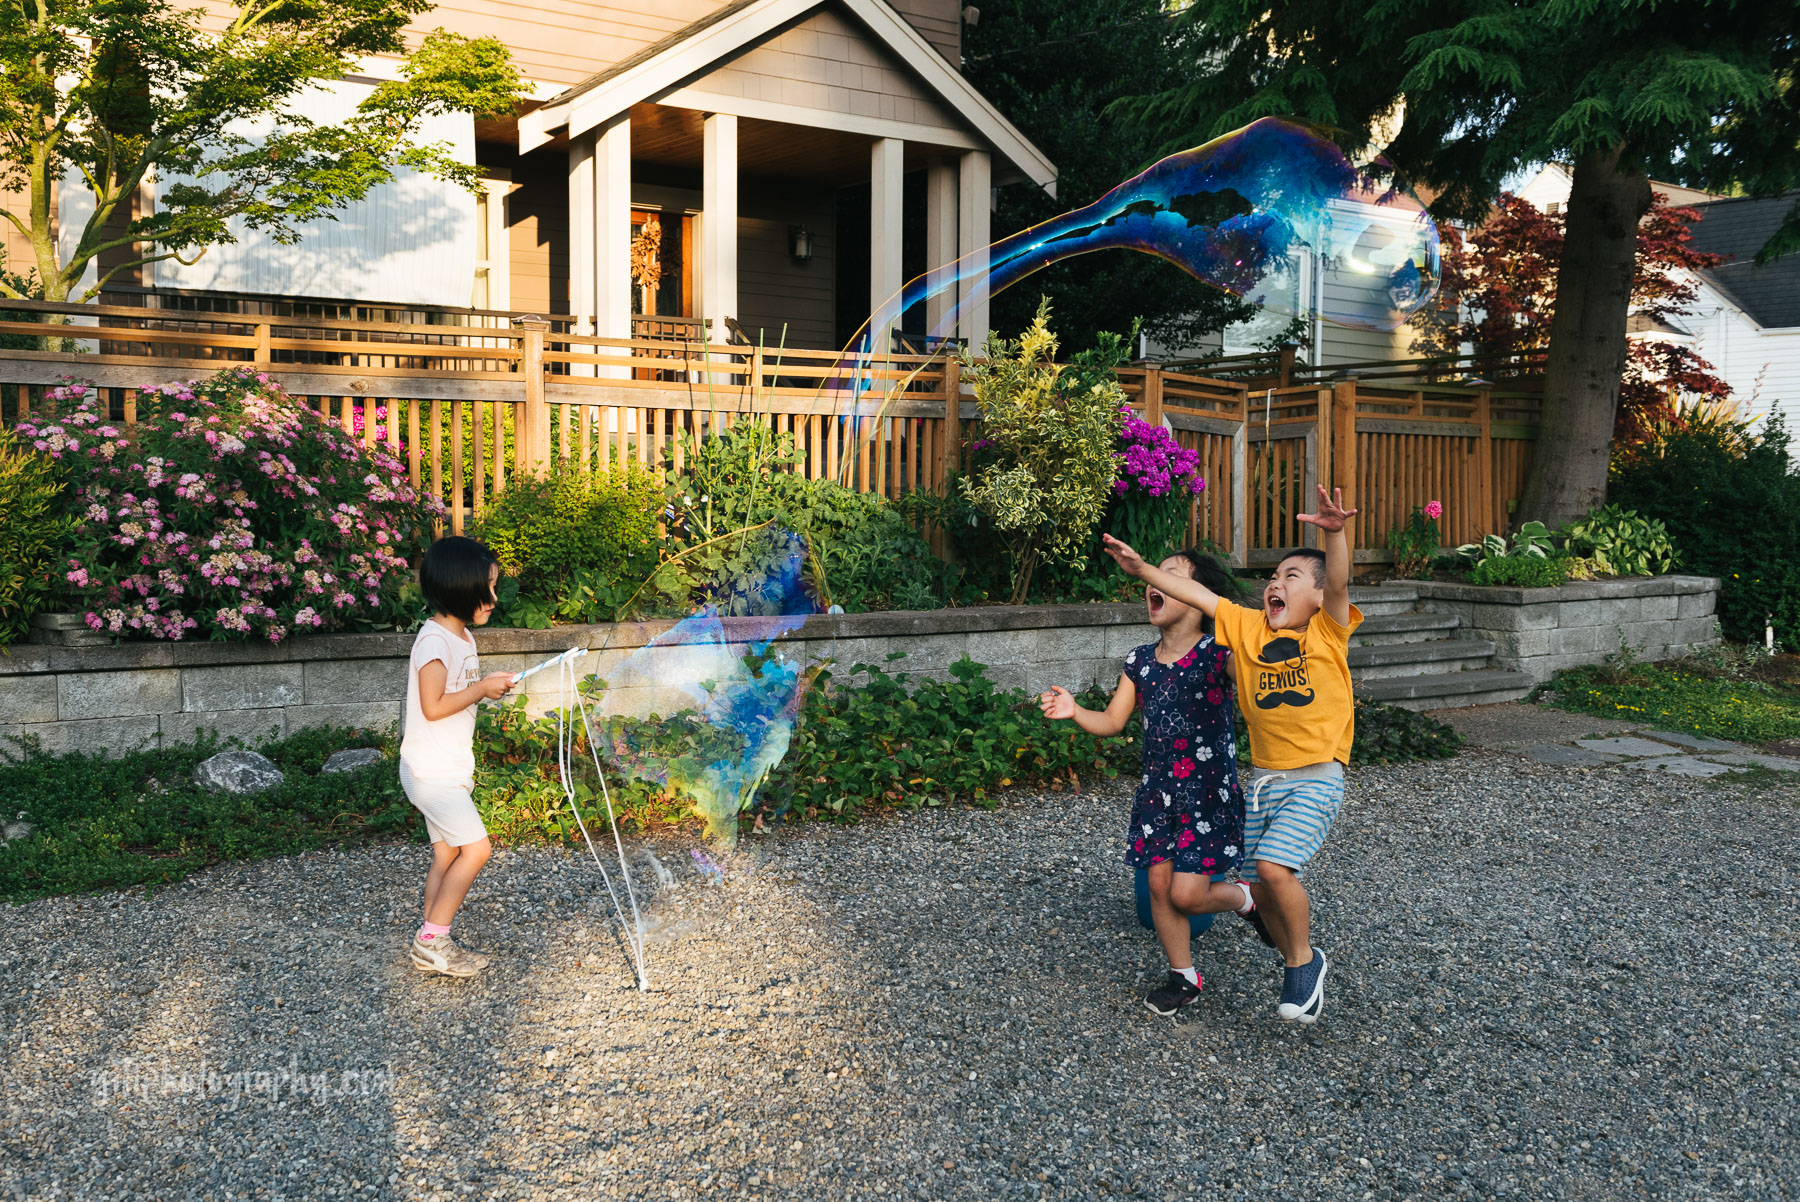 little girl making a giant bubble that her brother and sister are trying to pop